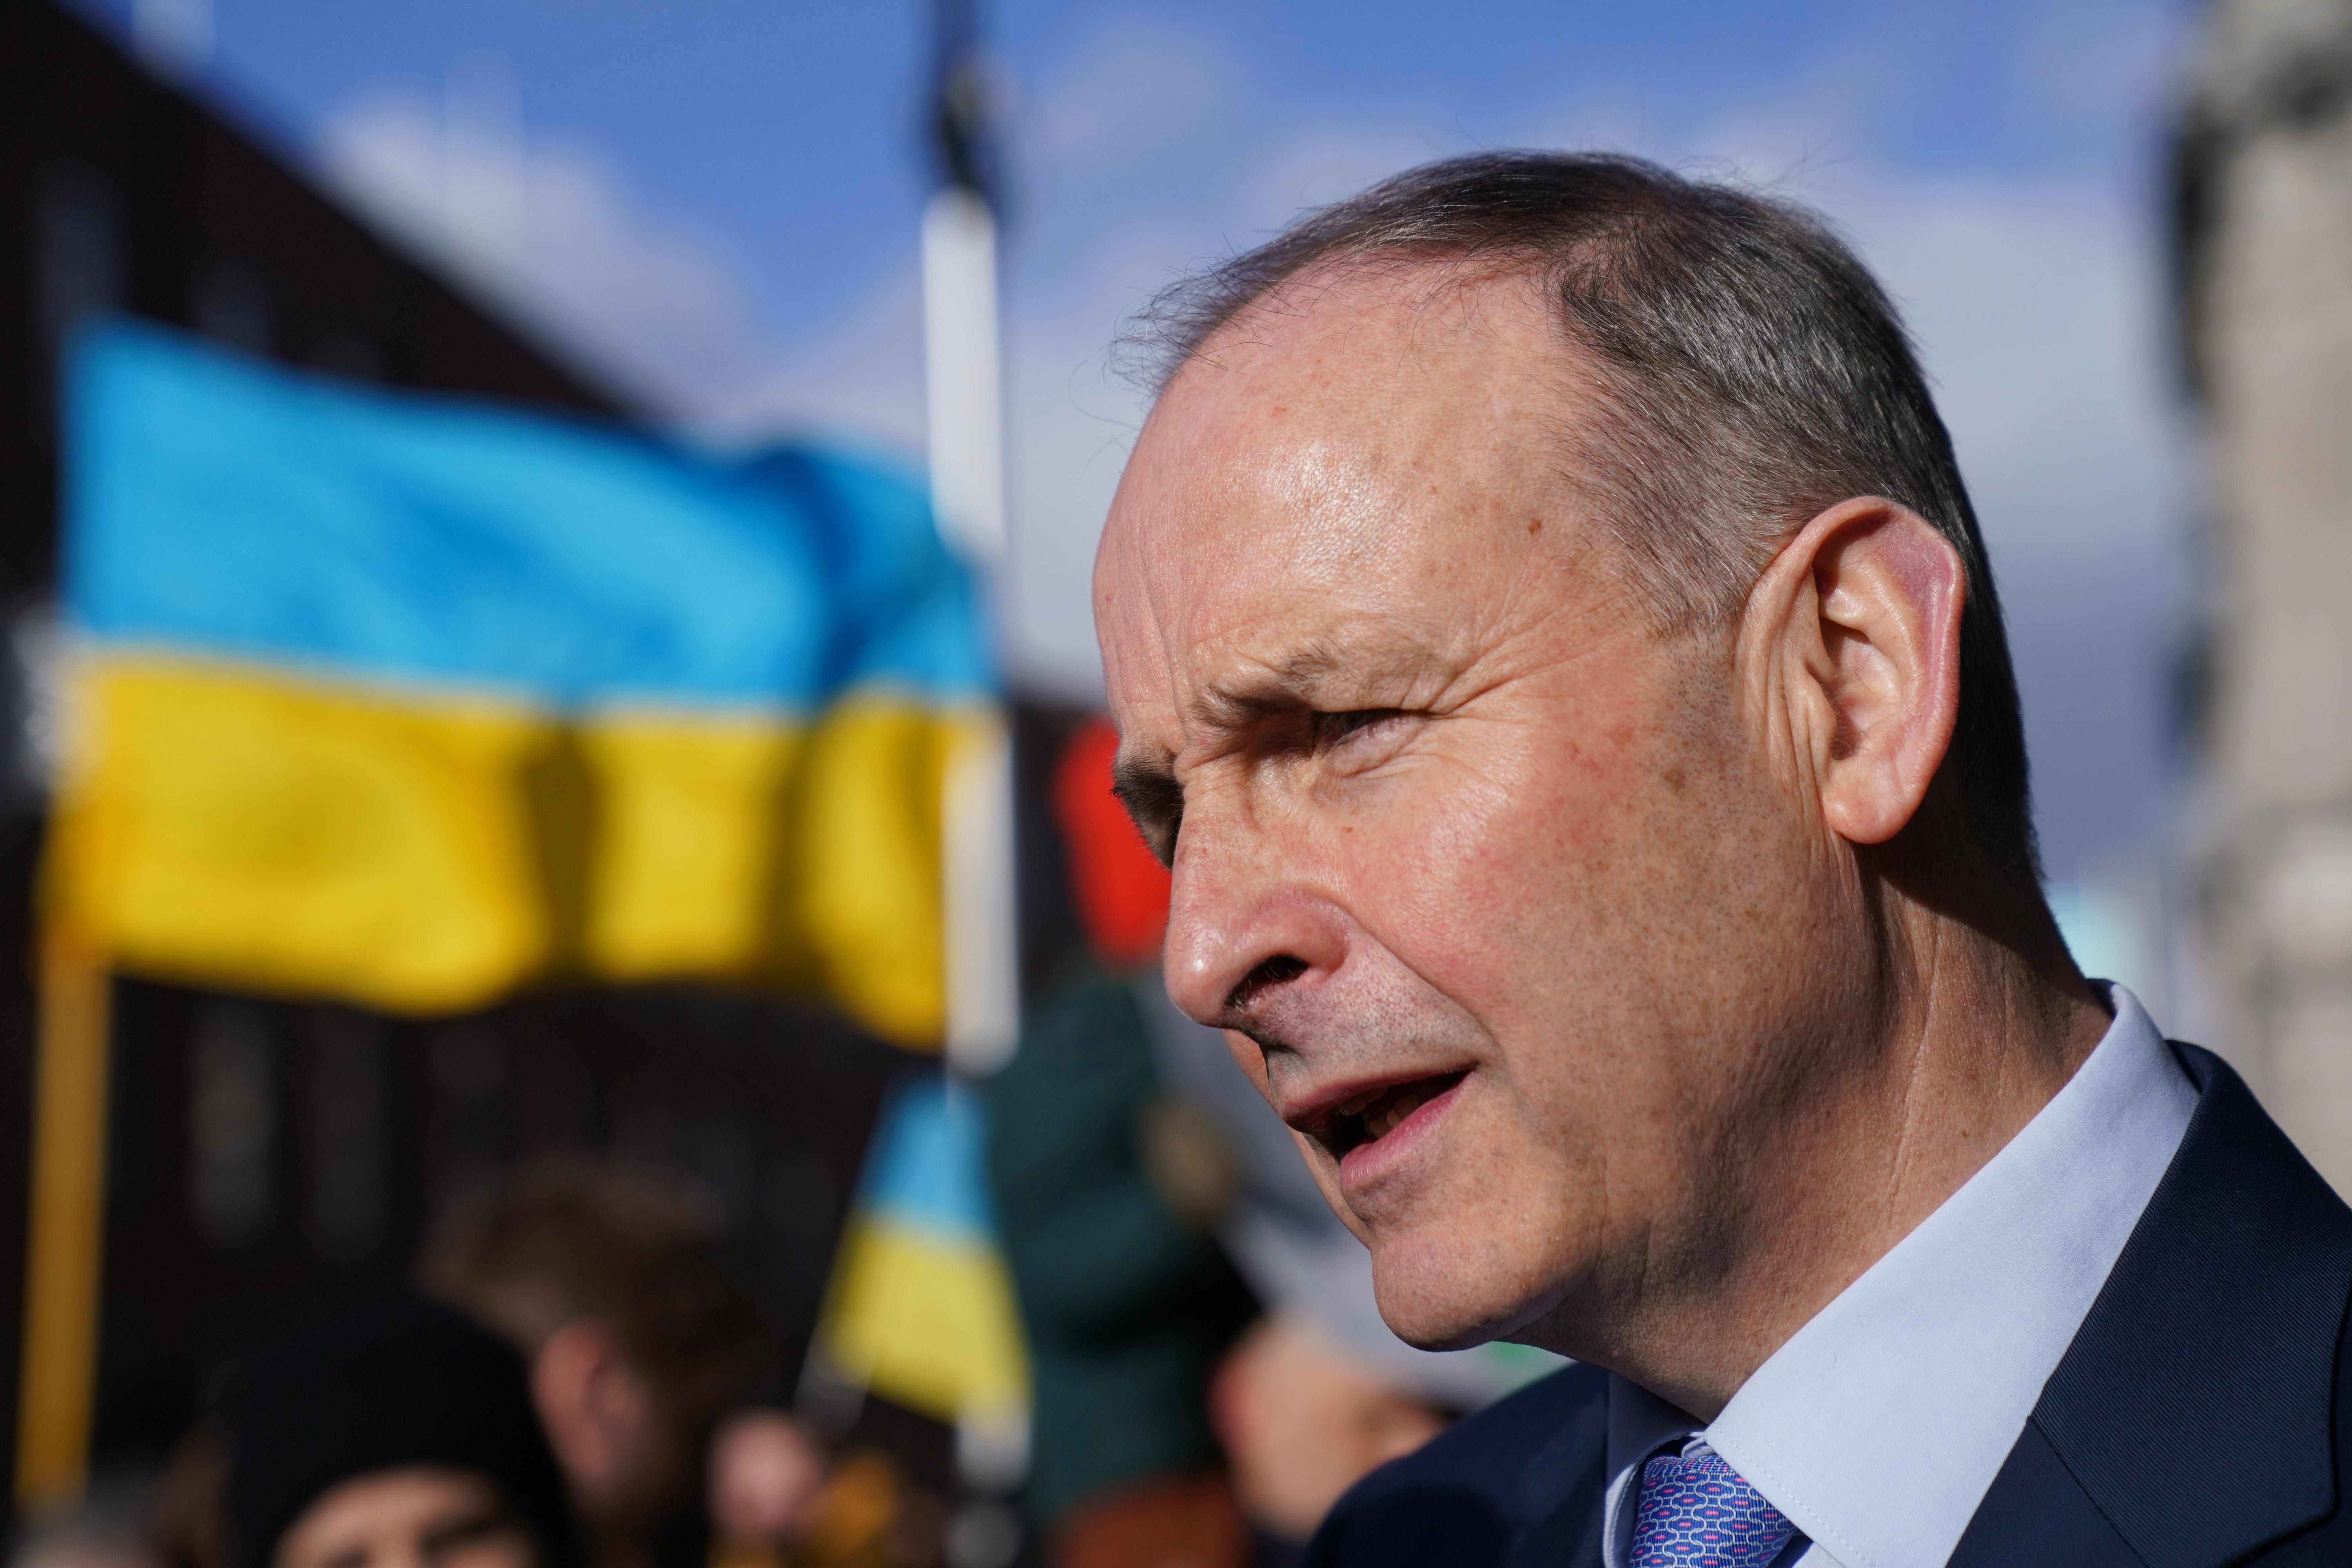 Taoiseach Micheal Martin – Ireland was singled out by the Ukrainian president, as he suggested it was lacking in its support for his country